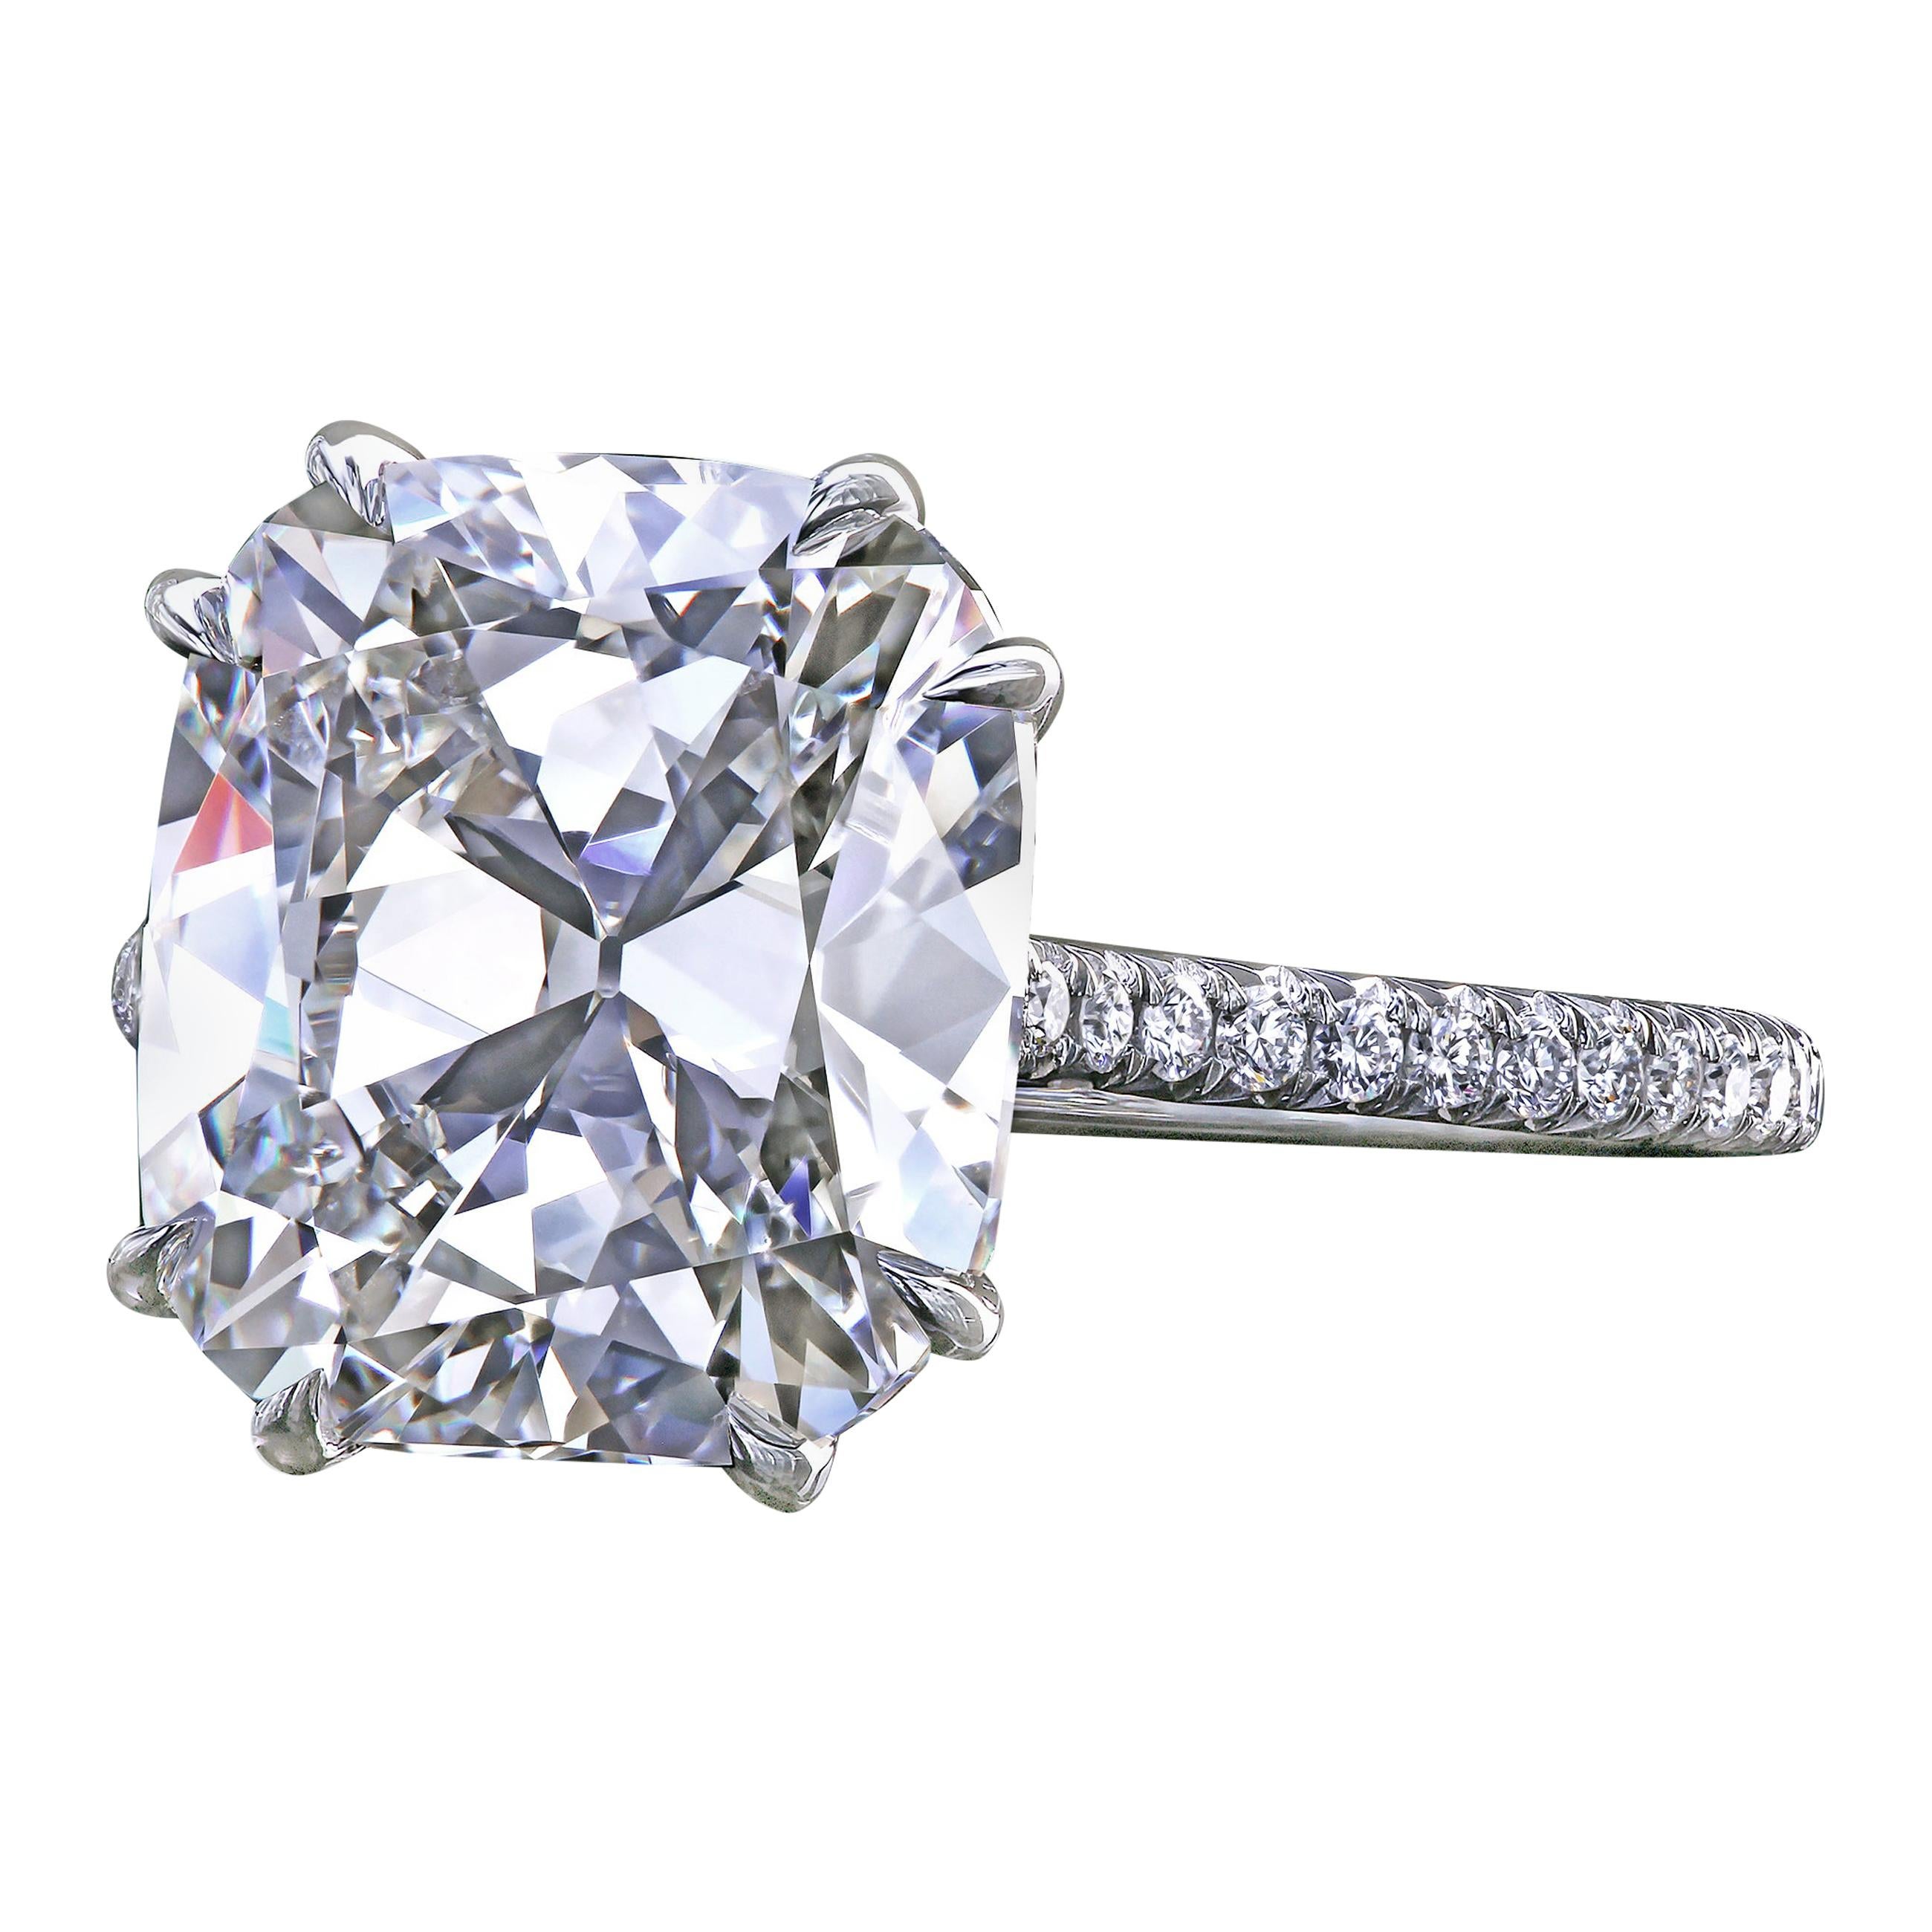 Leon Megé Antique Cushion Diamond Built to Order Engagement Ring with Micro Pave